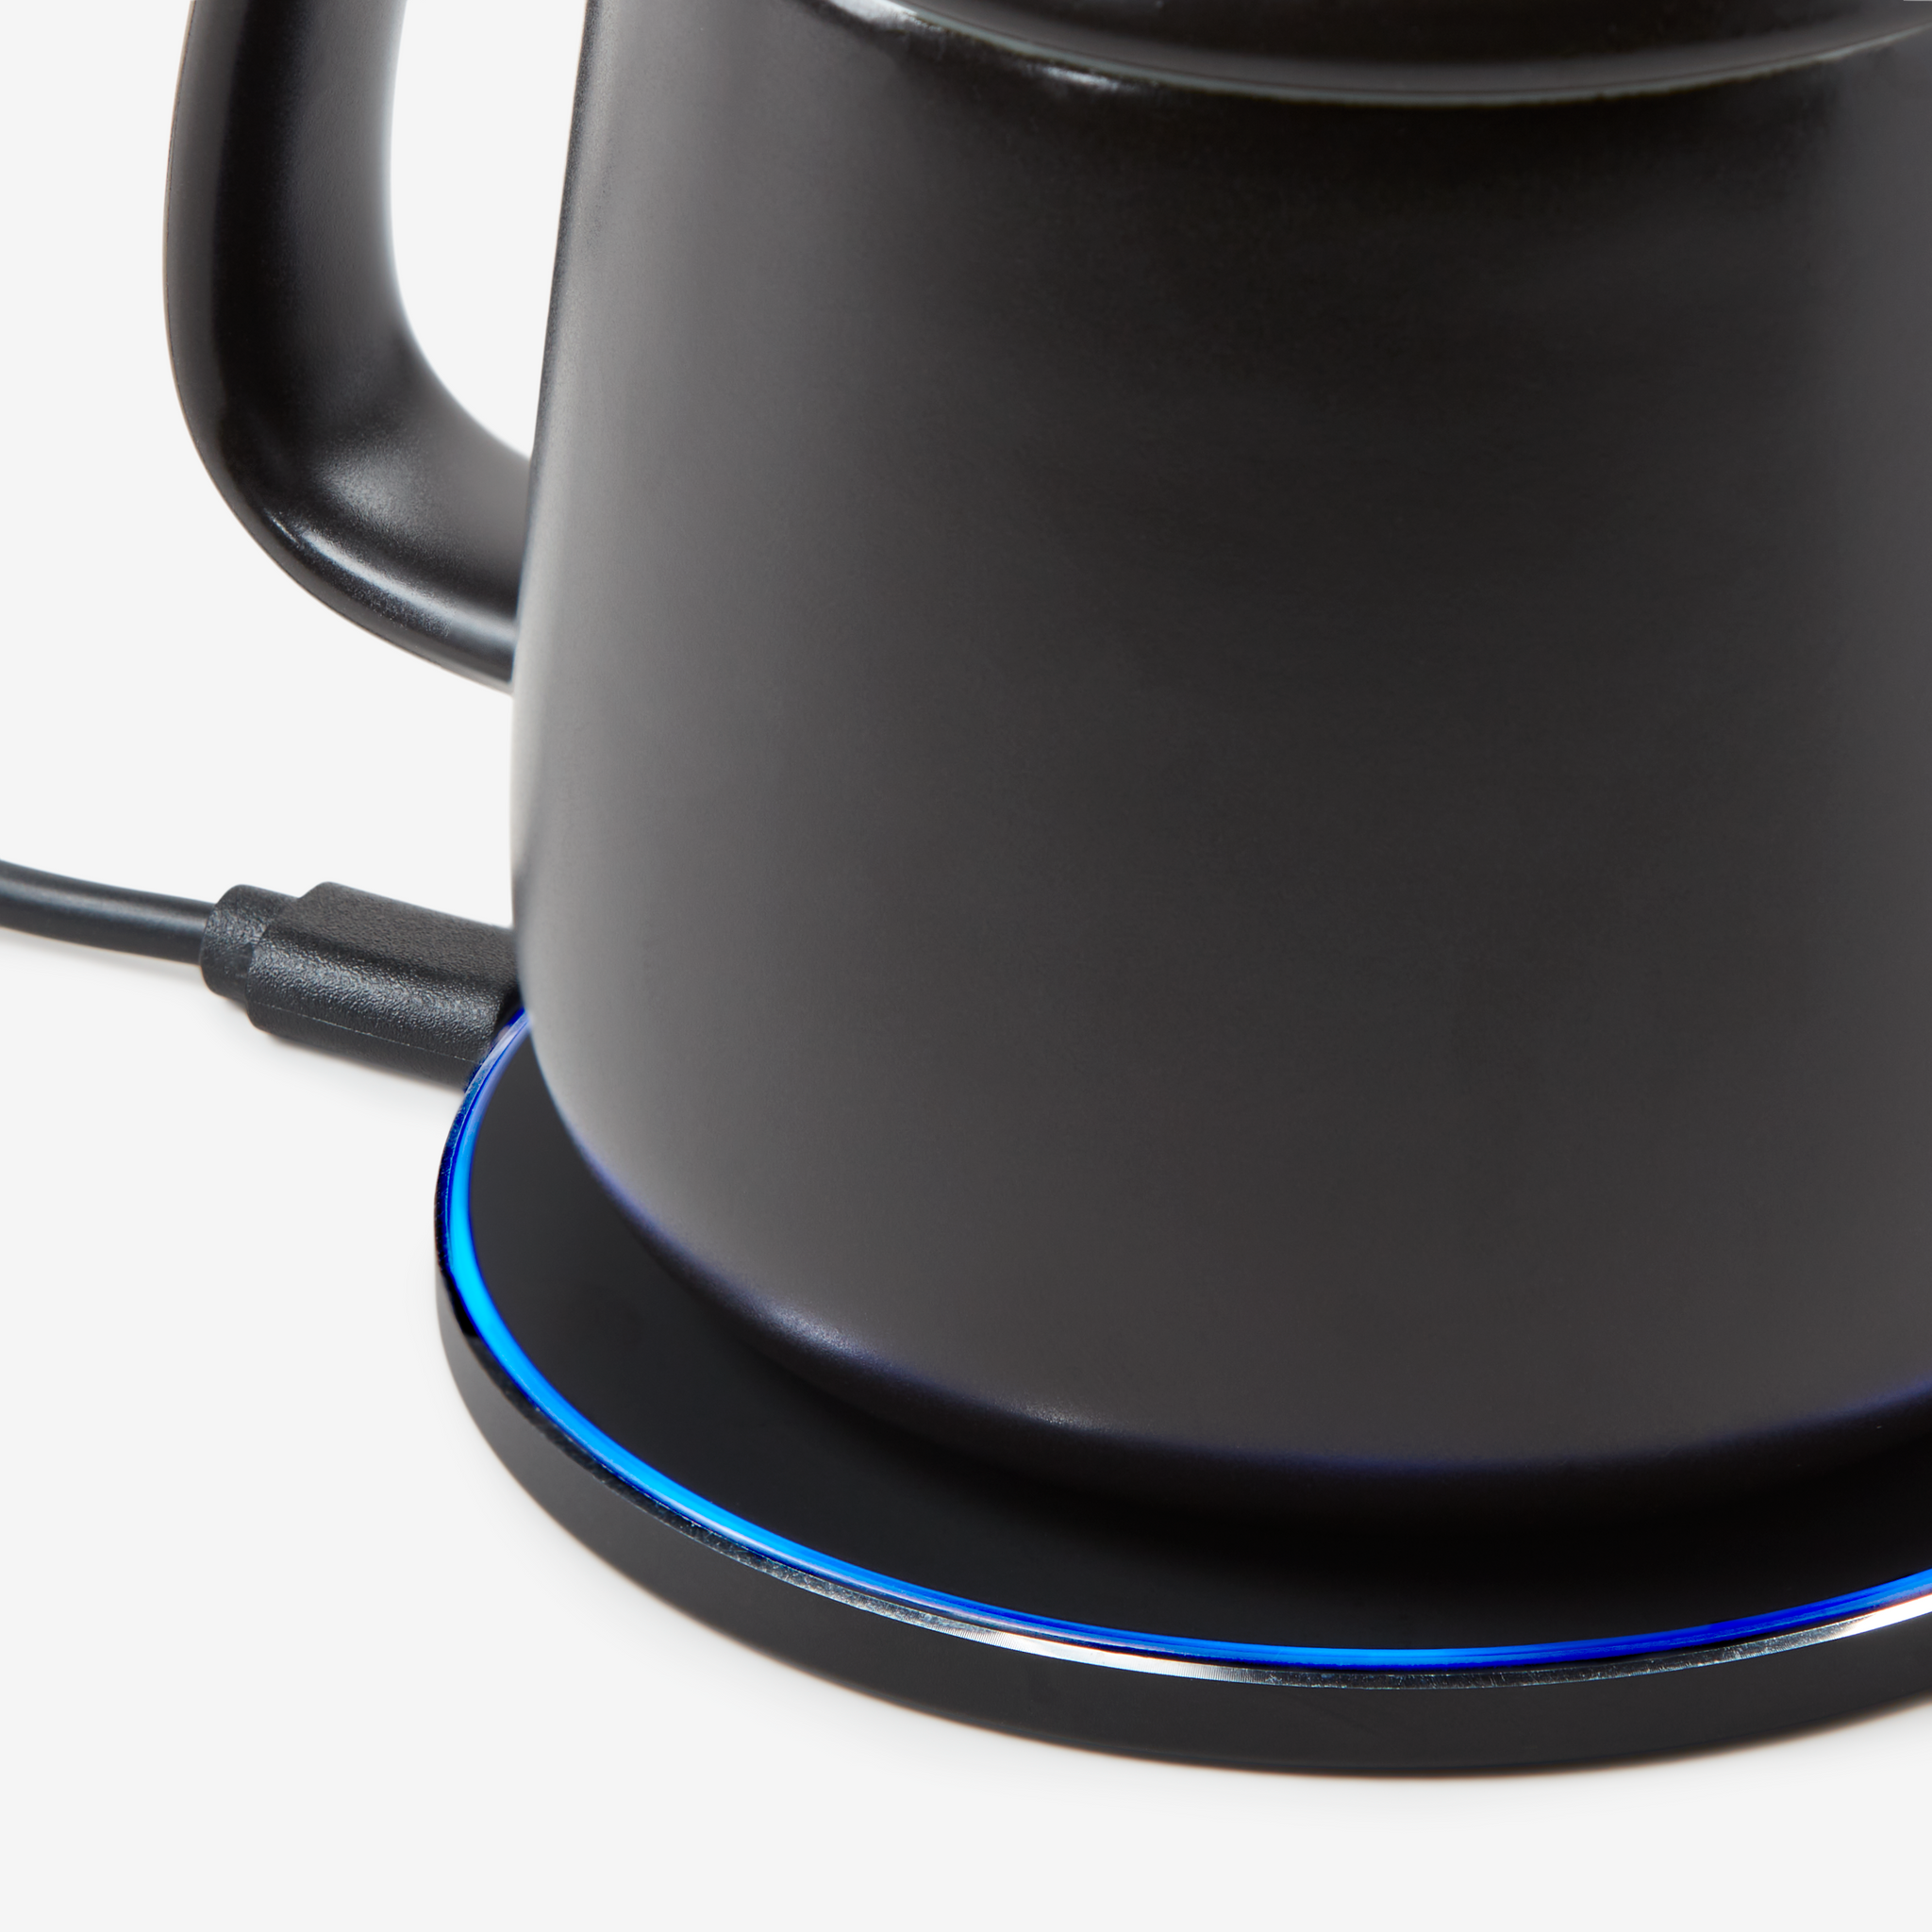 Lecone Coffee Mug Warmer with 15W Fast Wireless Charger Constant  Temperature (131°F/55°C) for Office Home Use Compatible with iPhone 11/11